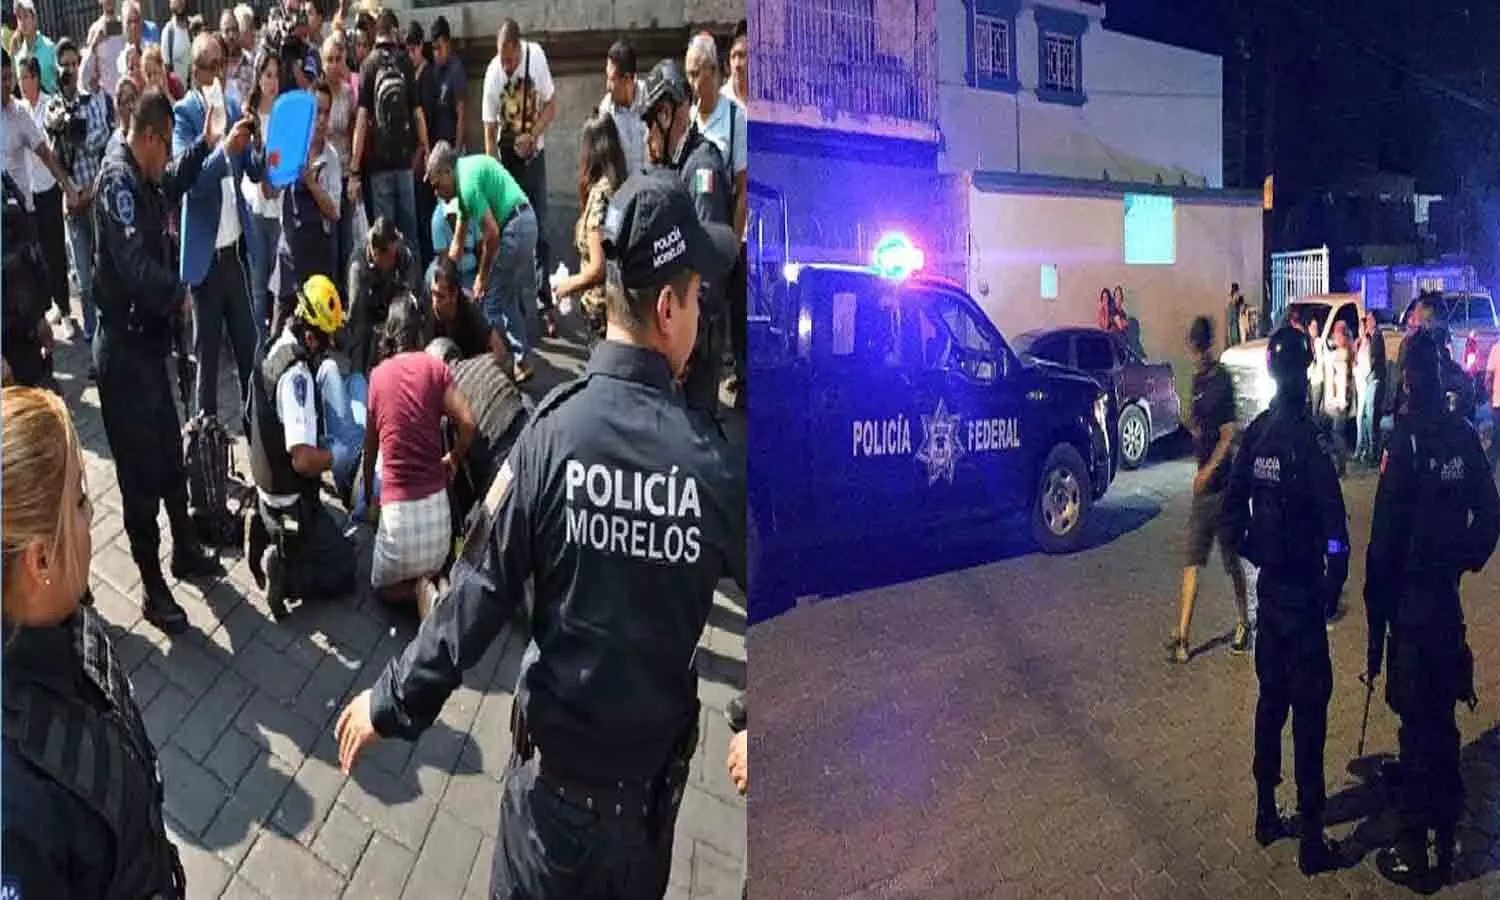 Mexico Violence: Bloody game in Mexico, 19 people died in gang war